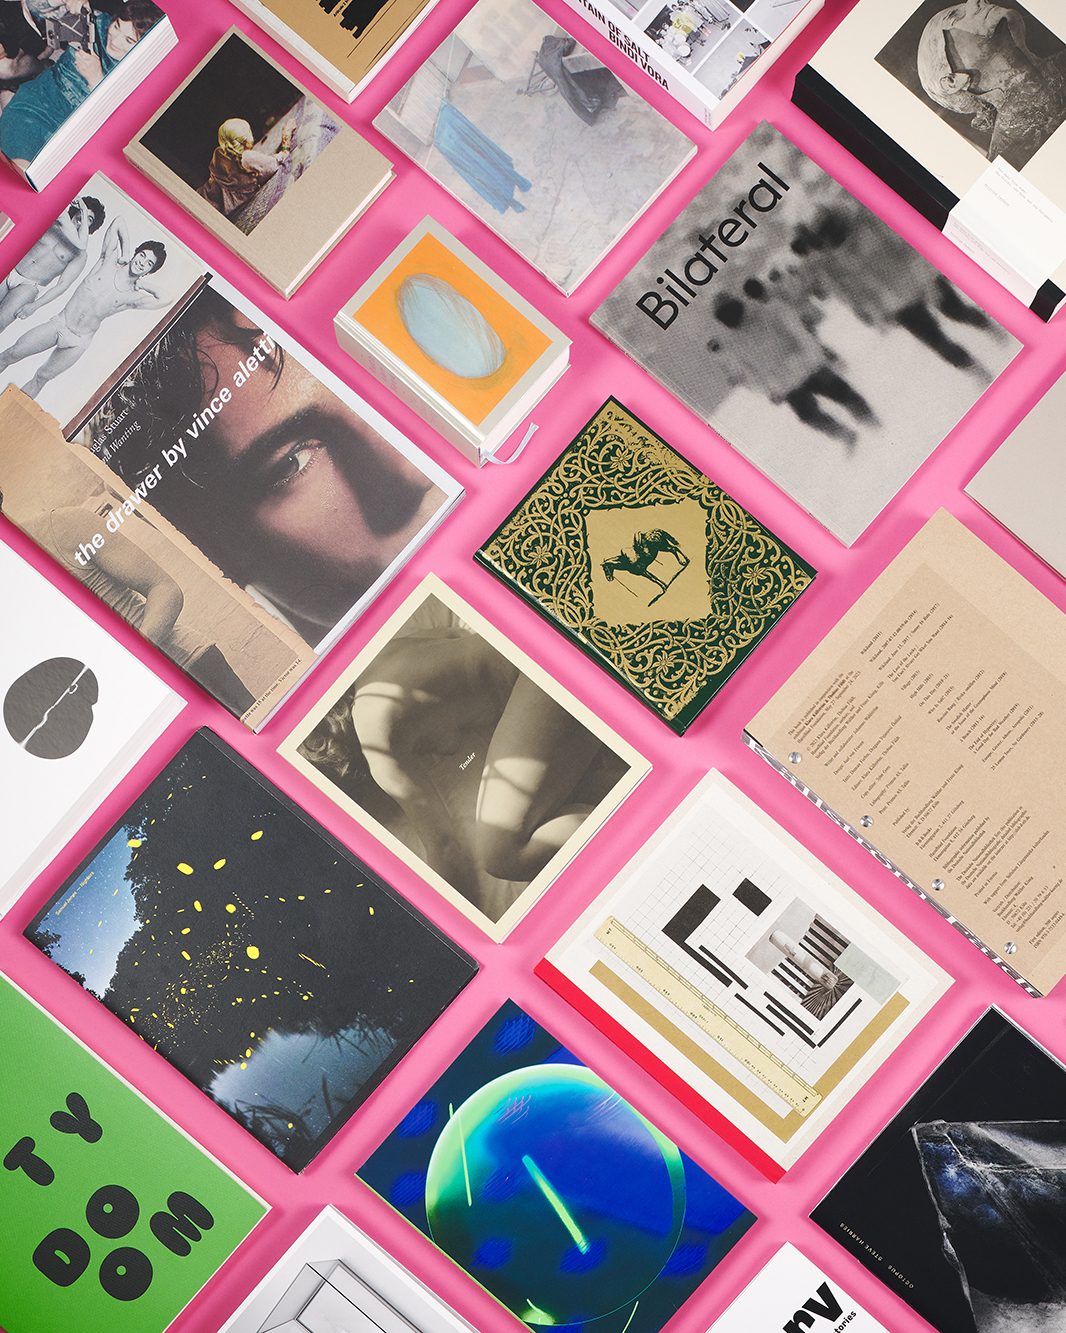 A Look Inside the Titles Shortlisted for the 2023 PhotoBook Awards